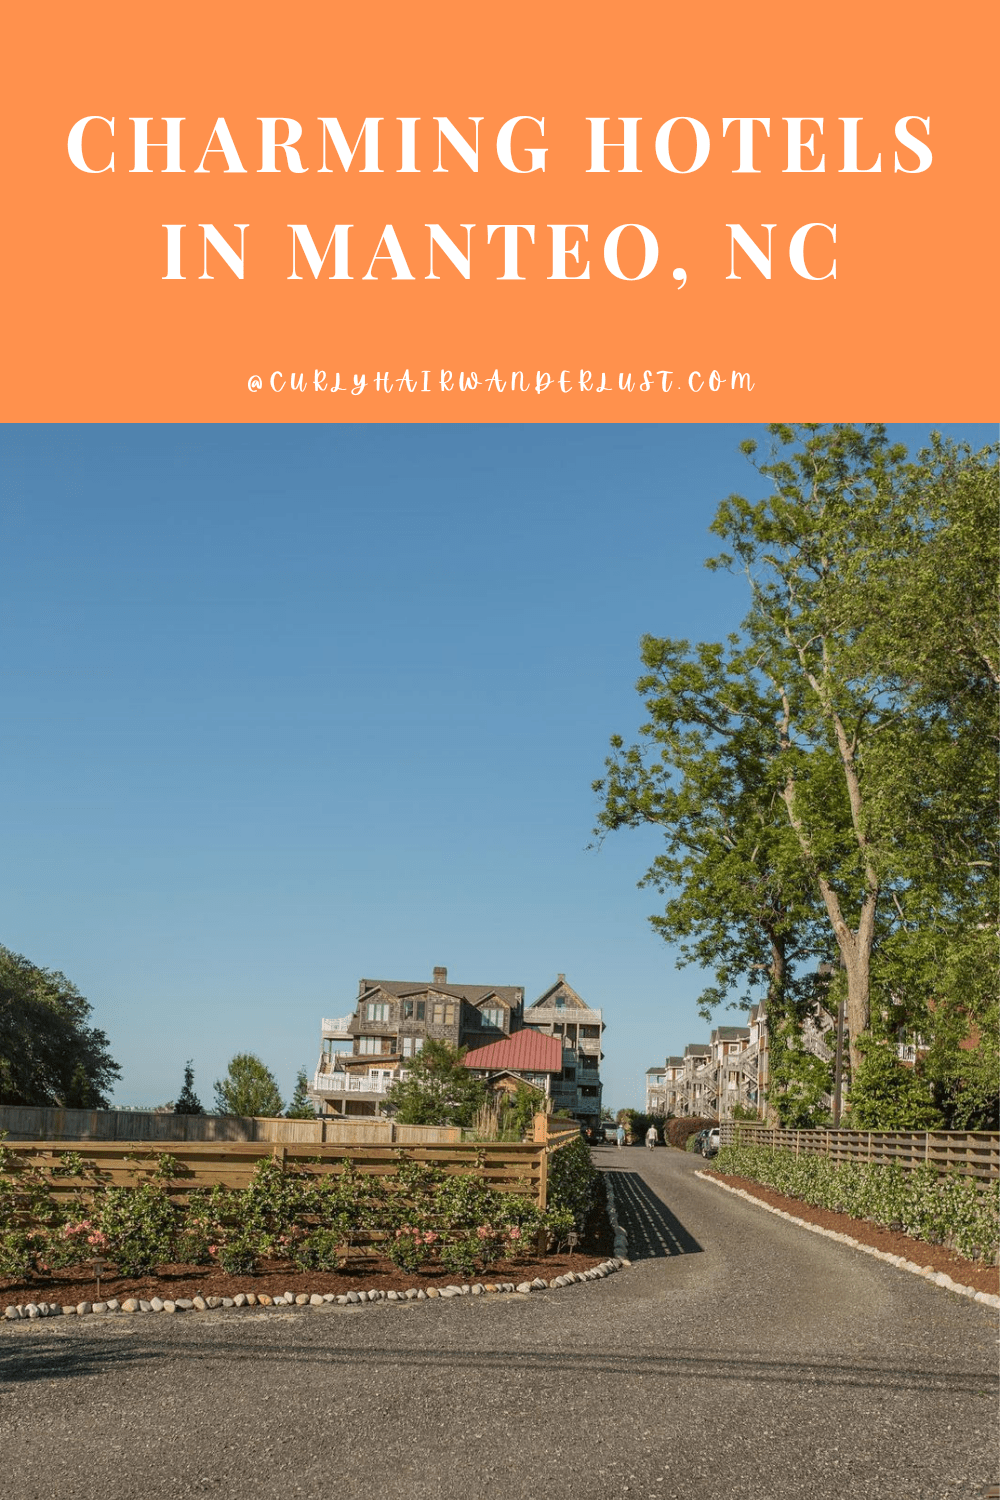 Charming hotels in manteo, NC 